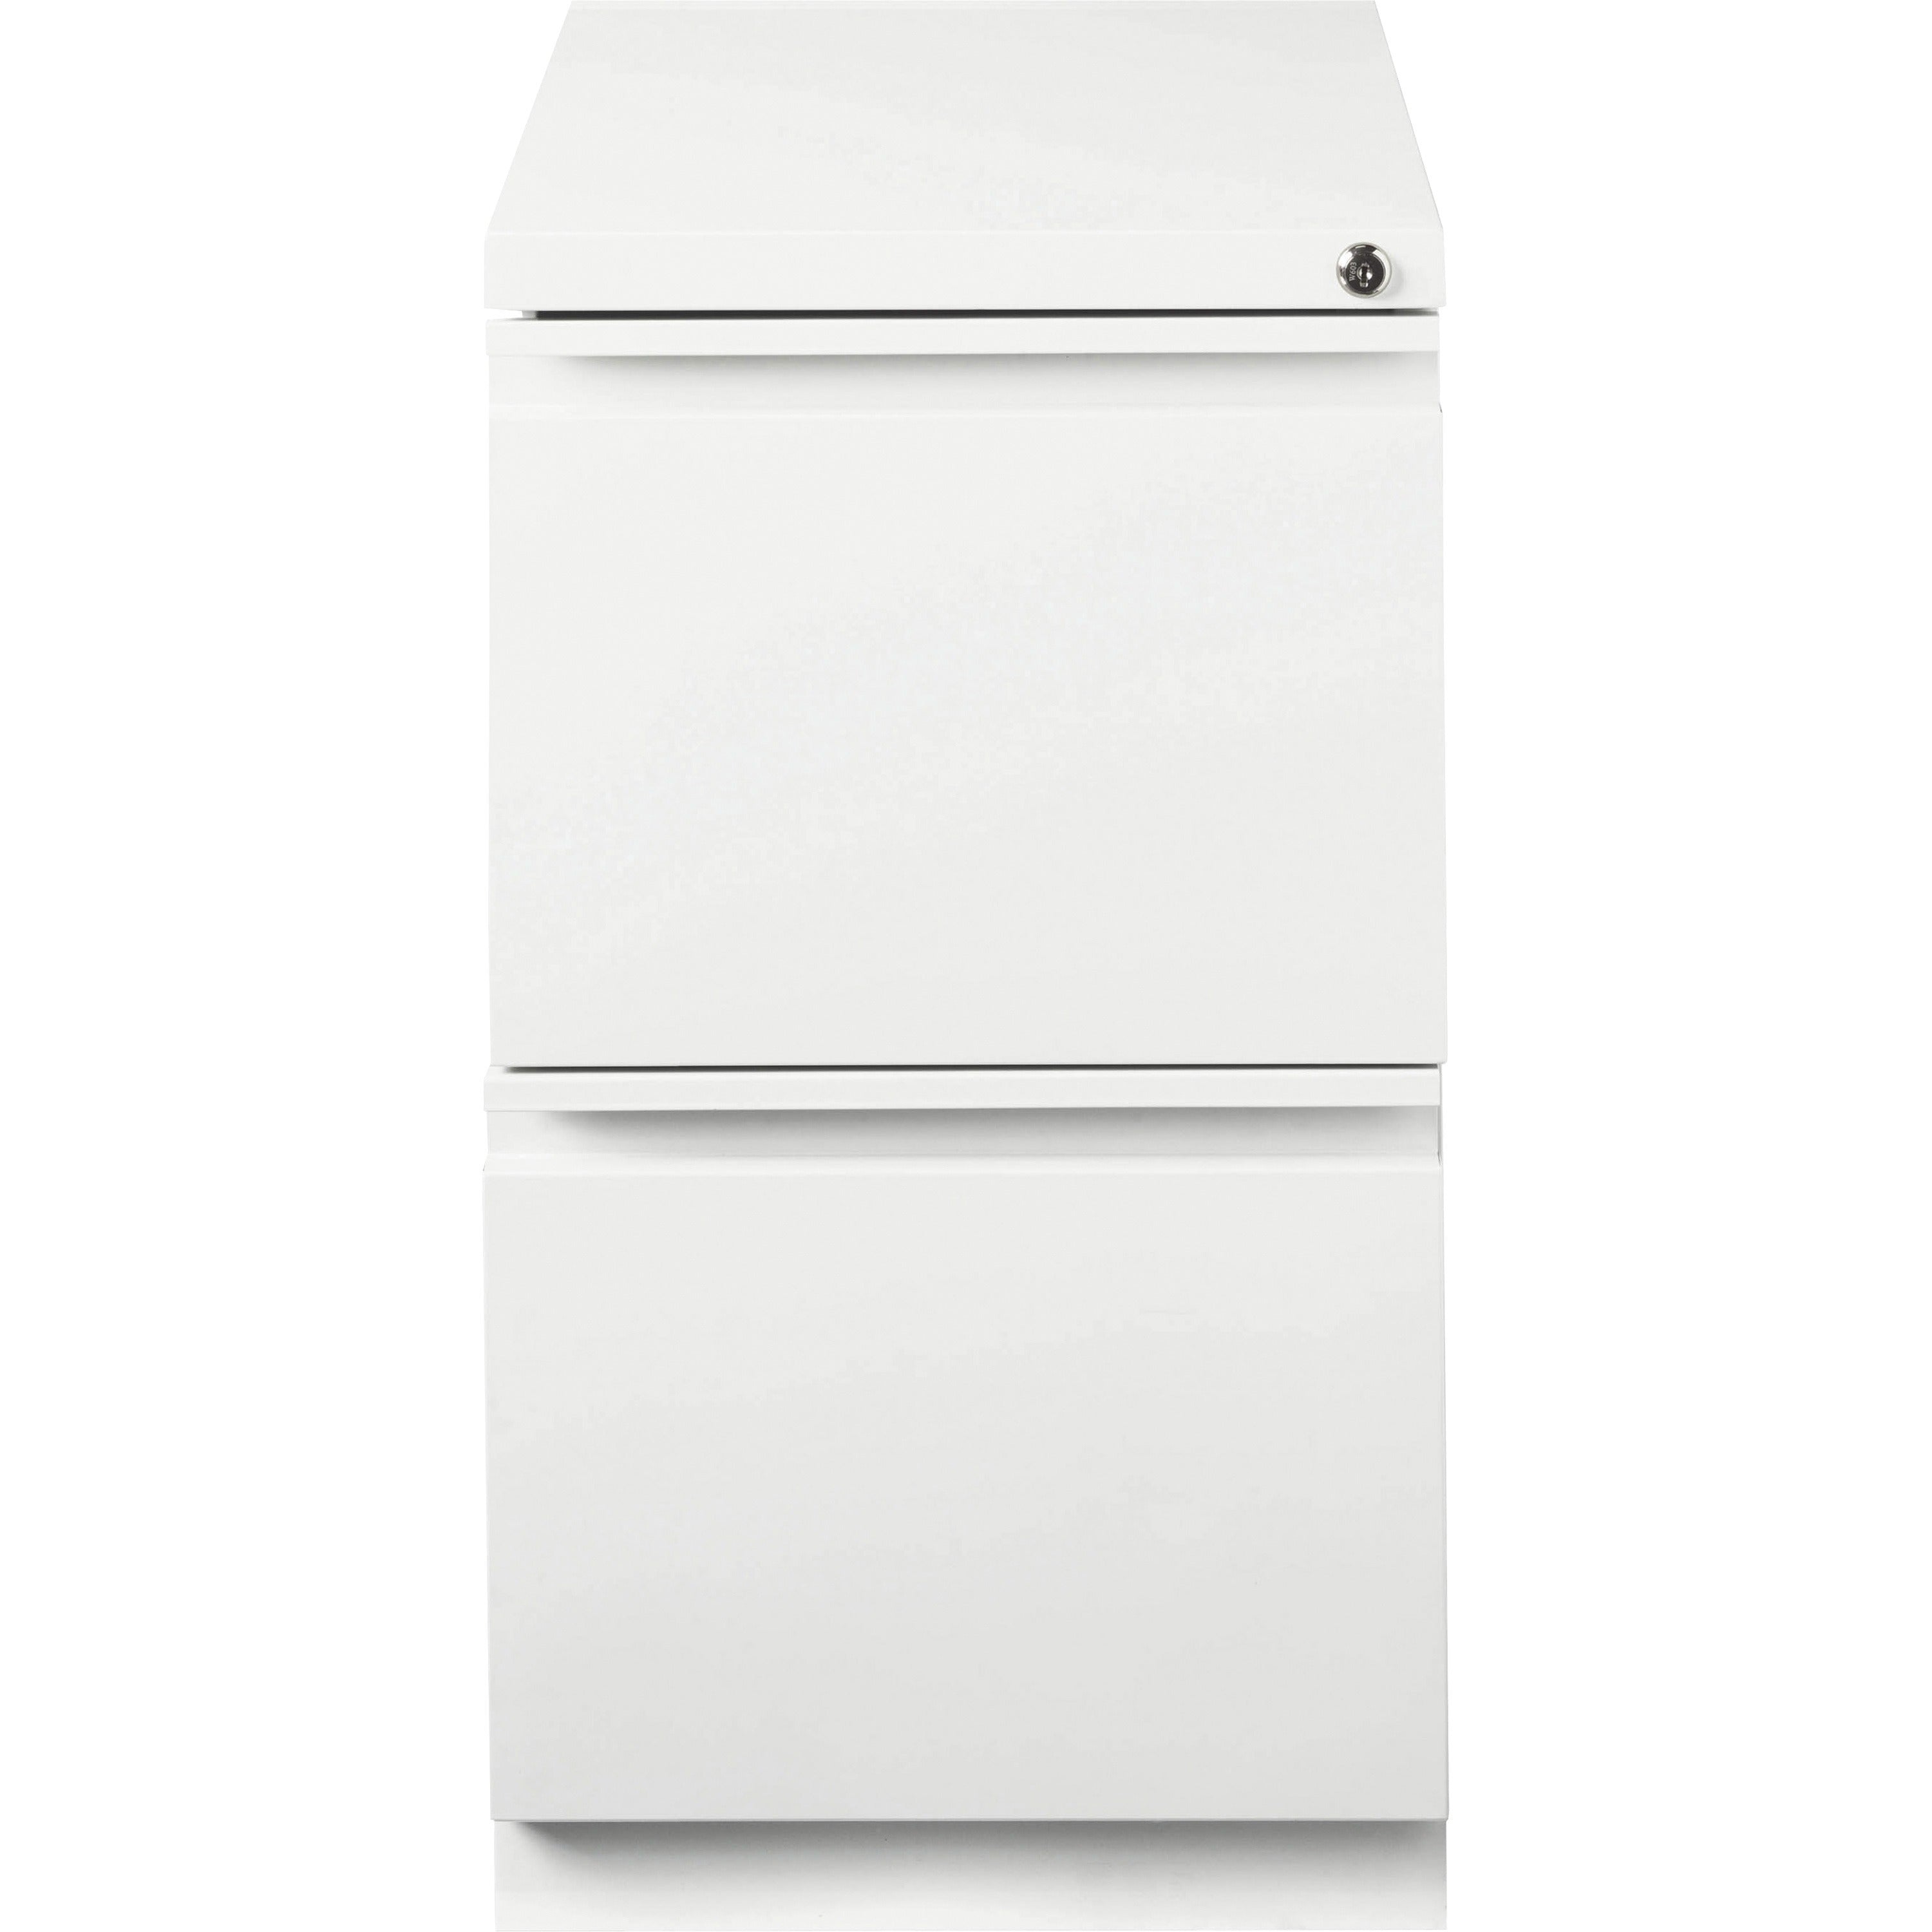 lorell-20-file-file-mobile-file-cabinet-with-full-width-pull-15-x-199-x-278-for-file-letter-mobility-ball-bearing-suspension-removable-lock-pull-out-drawer-recessed-drawer-casters-key-lock-white-steel-recycled_llr00050 - 3